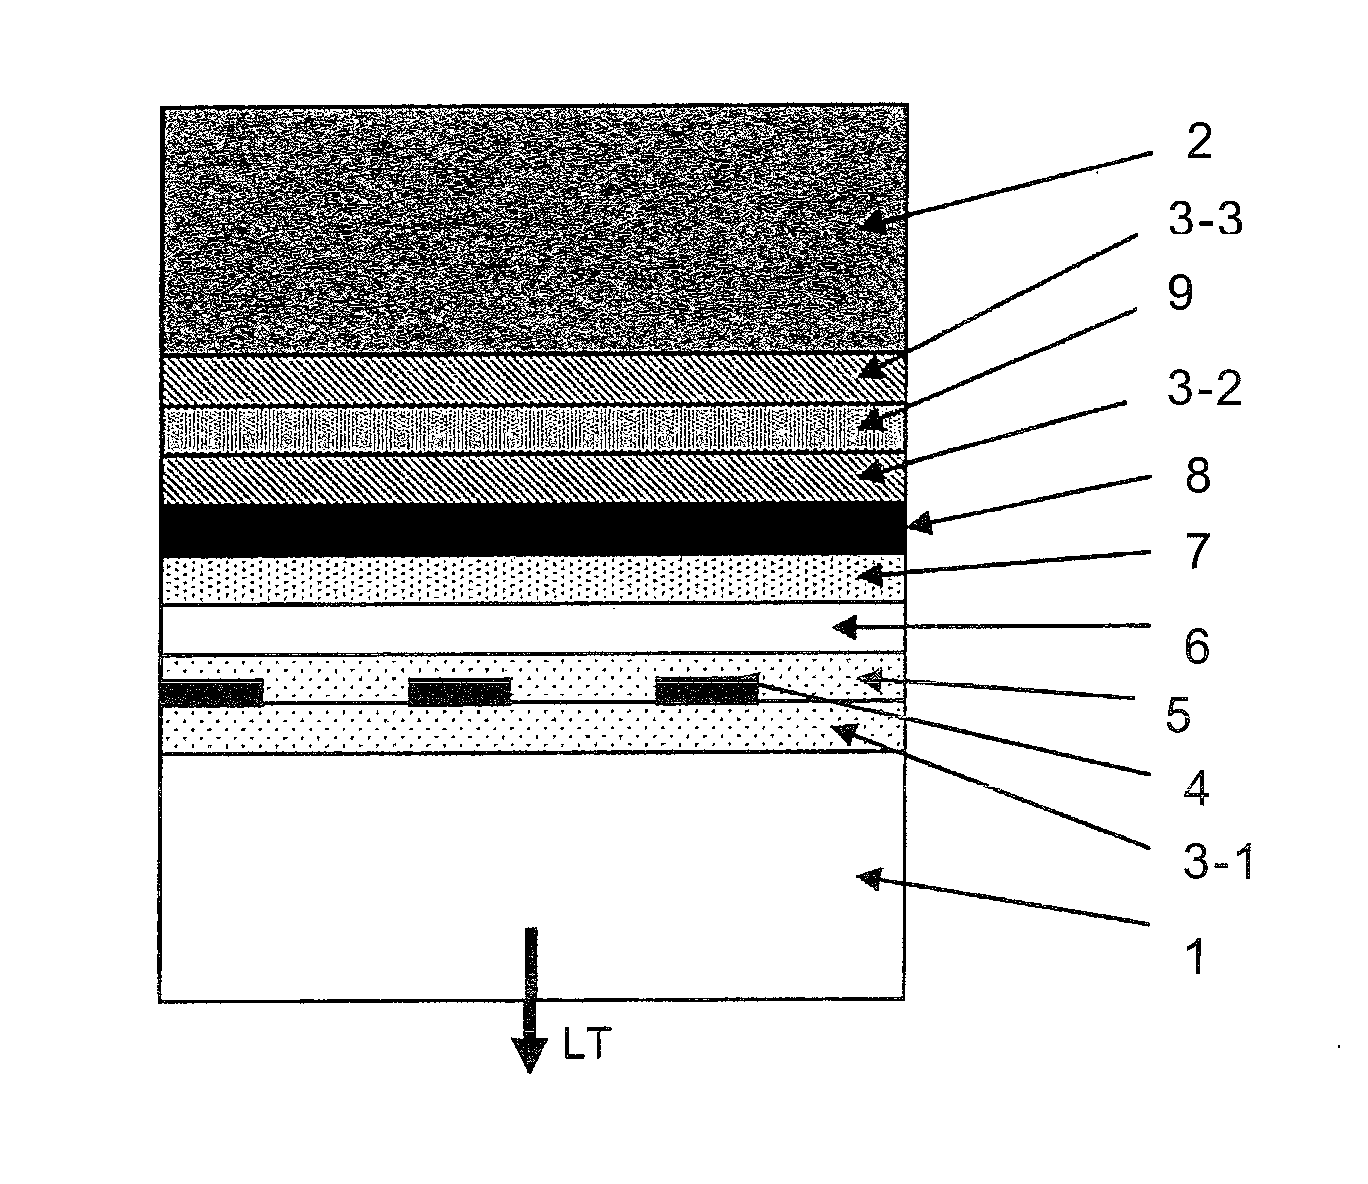 Display device, method for manufacturing same, polyimide film for display device supporting bases, and method for producing polyimide film for display device supporting bases